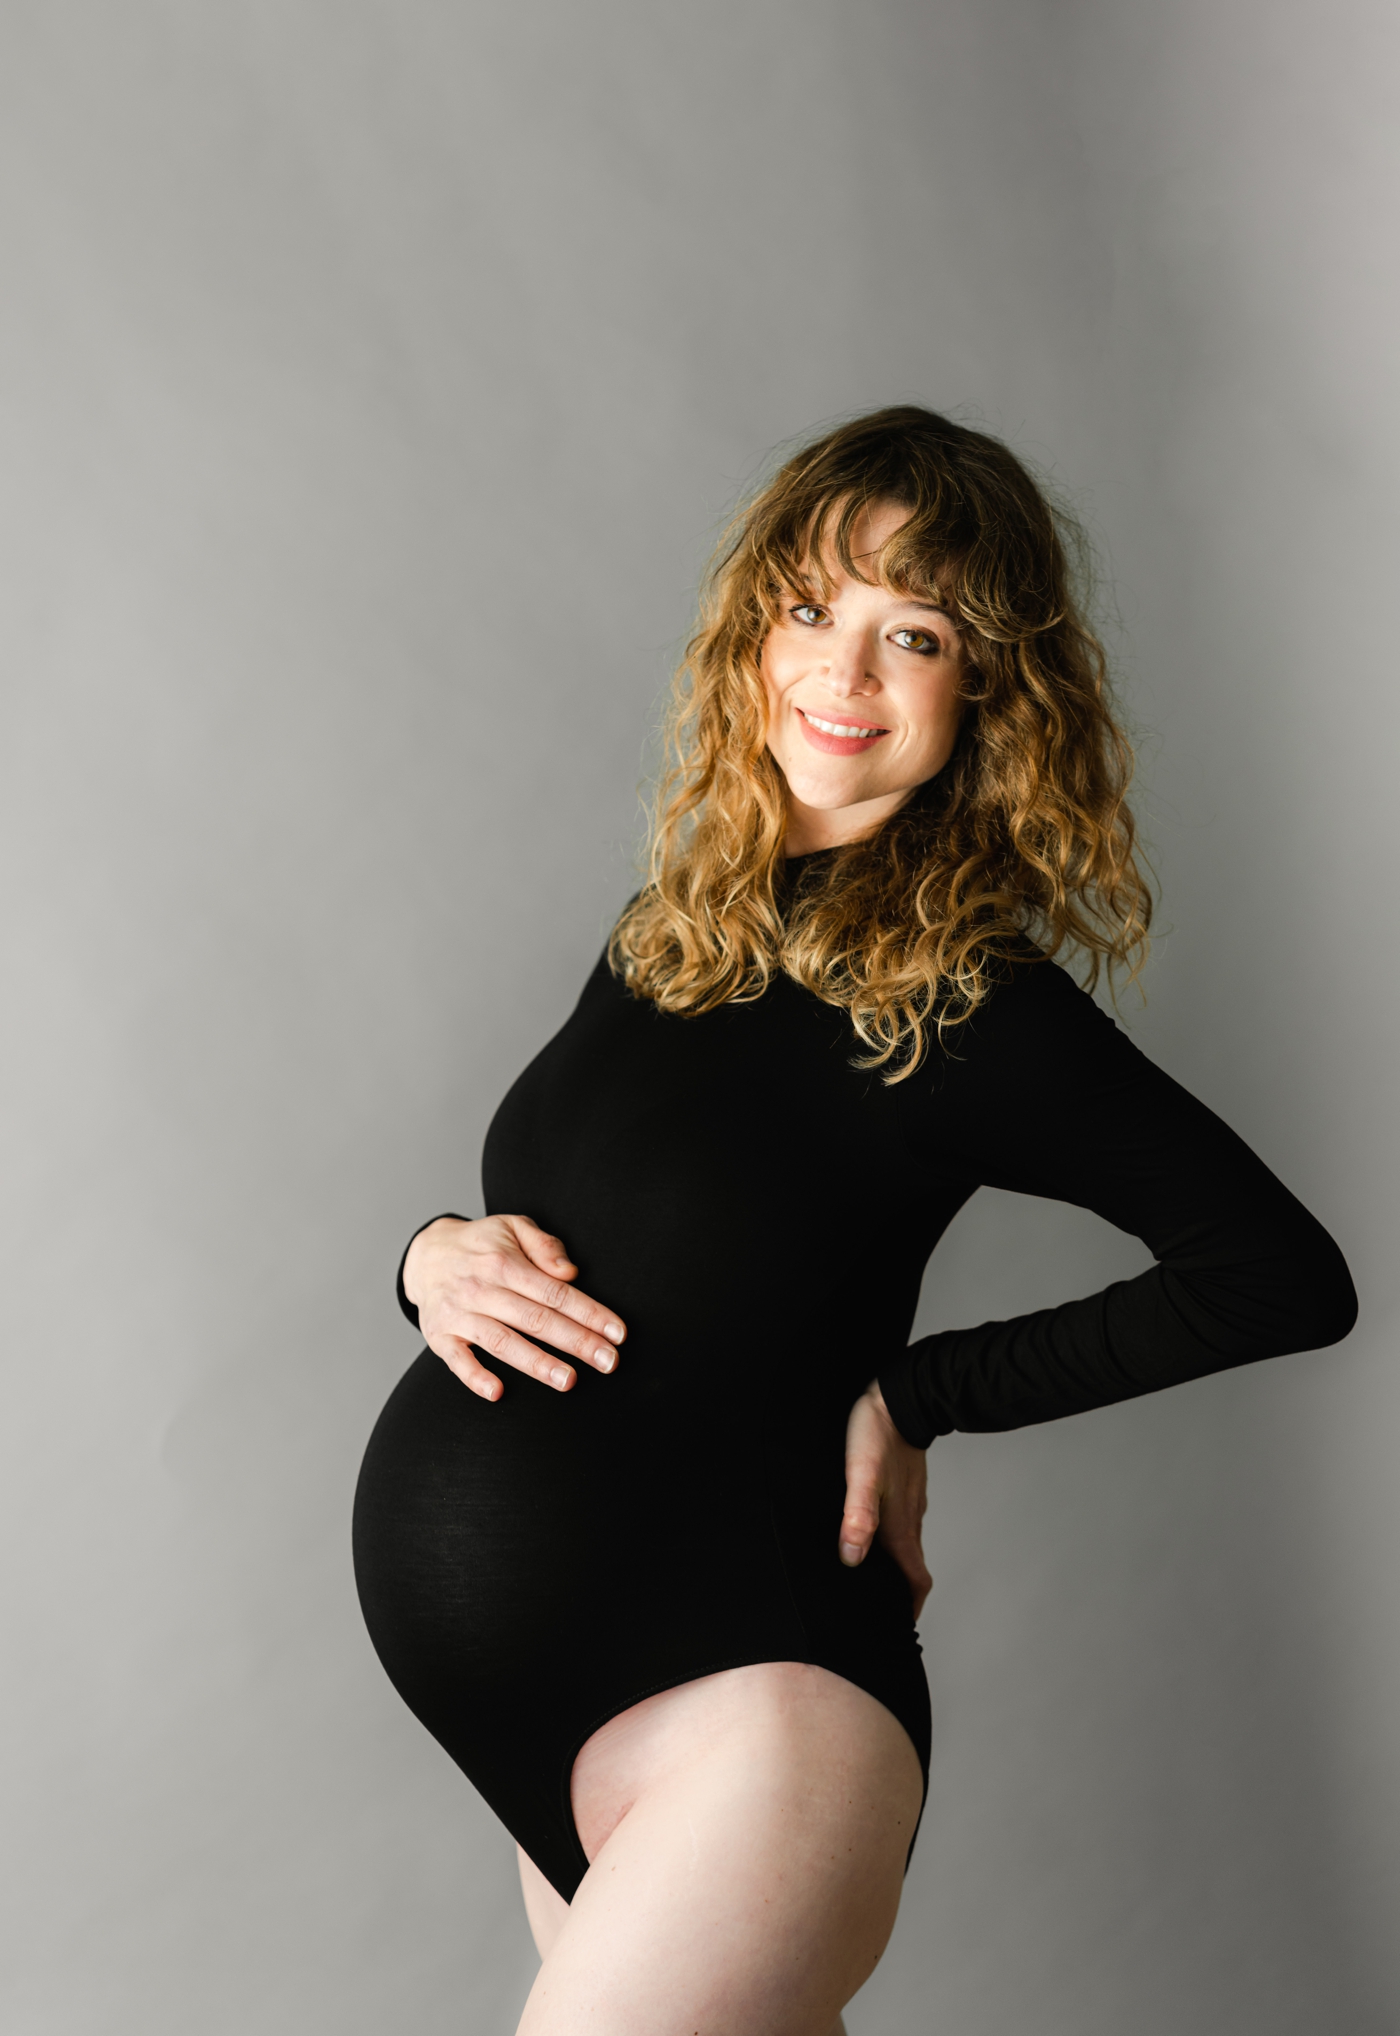 Mom wearing black leotard during maternity session inspired by dance. Photo bY Asheville Maternity Photographer, Lauren Sosler Photography.